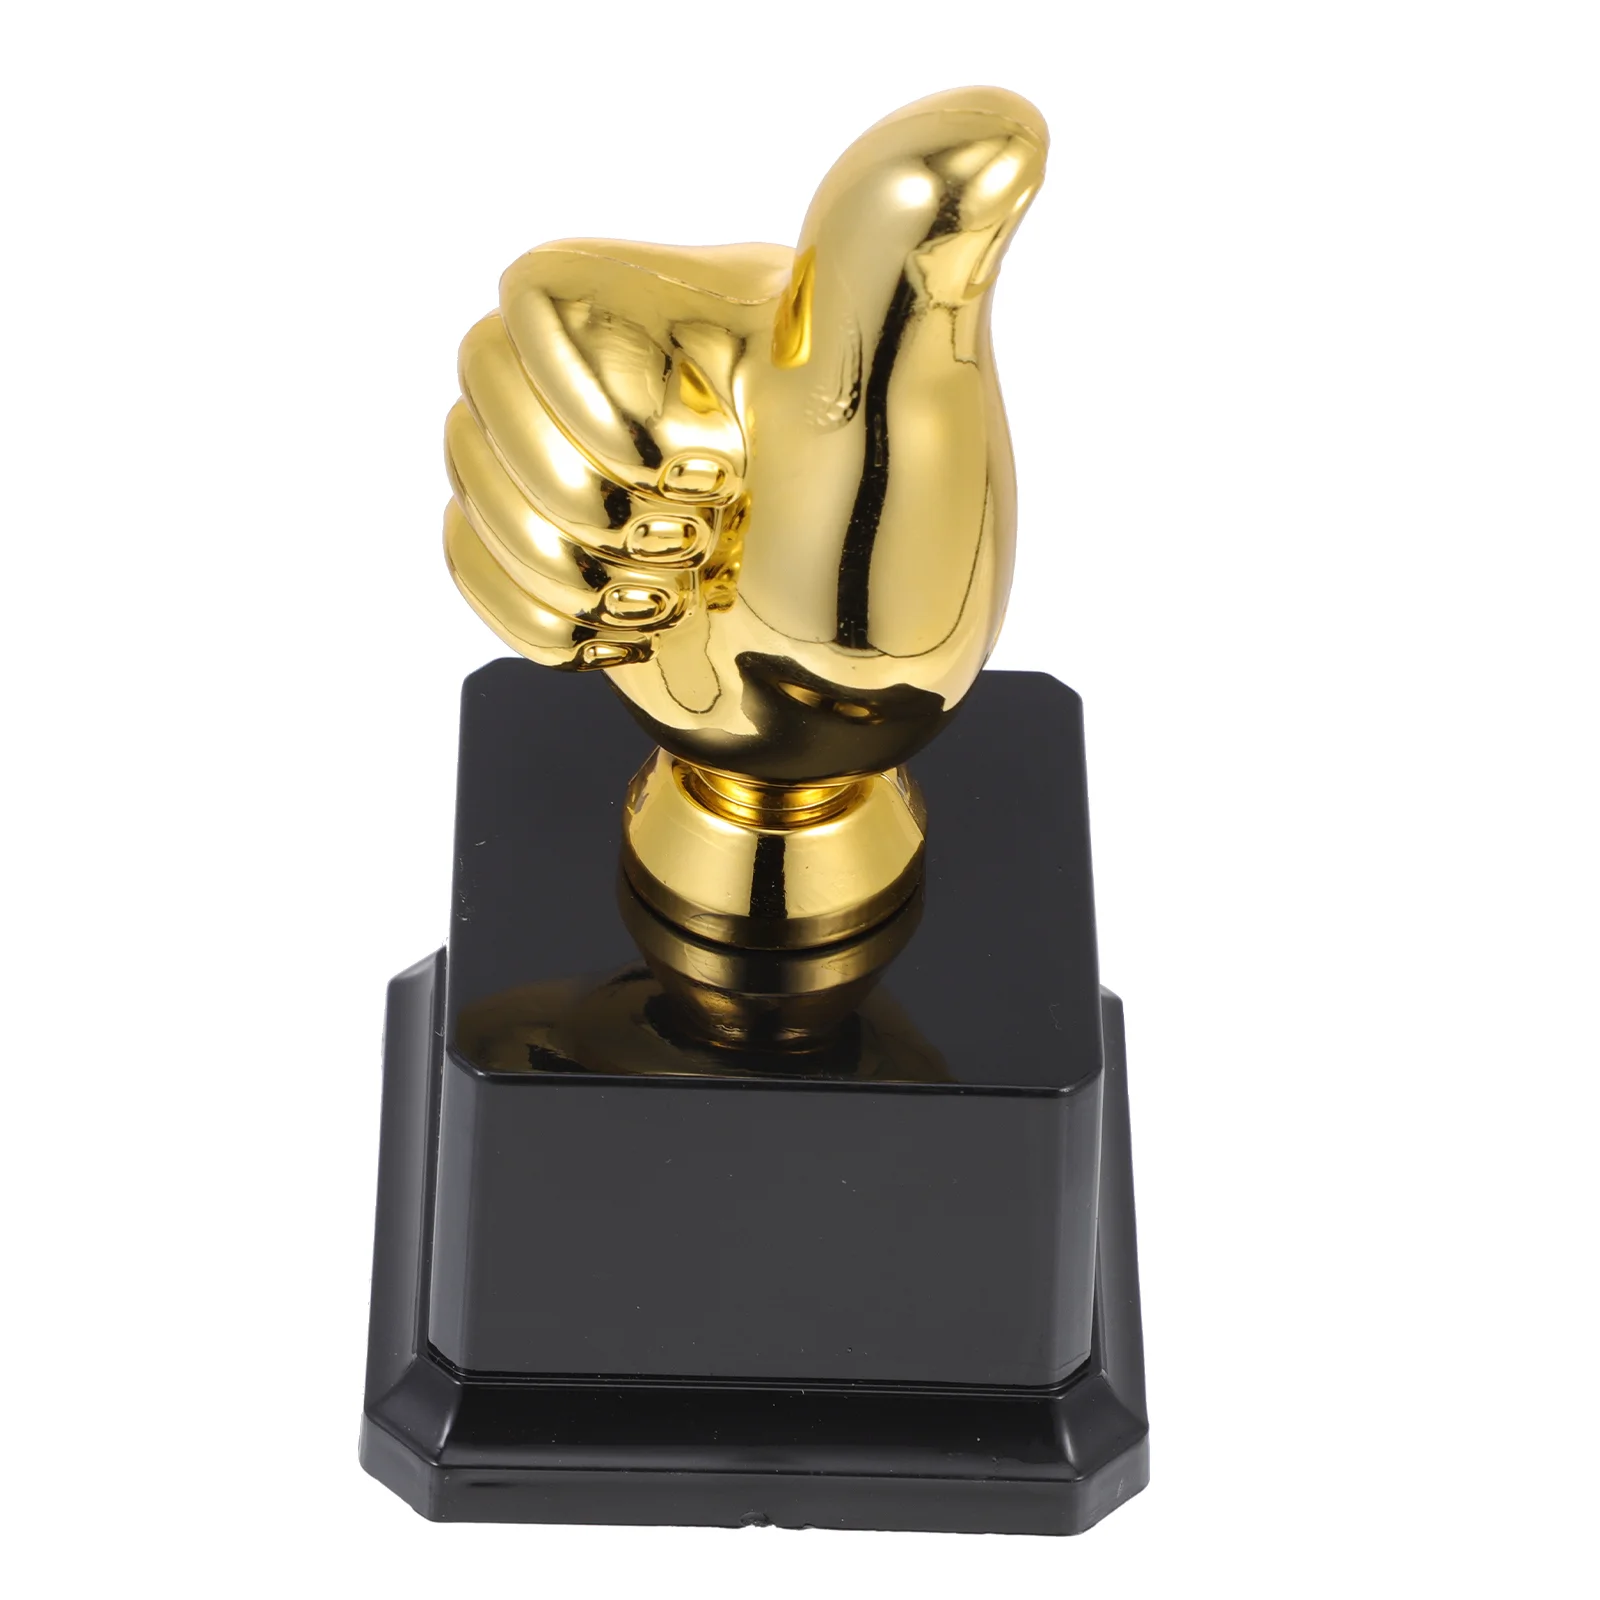 Trophy Awards Thumb Up Award Trophy Awards Plastic Golden Rewards Trophies Gold Awards Trophies Party Favors Sports Competition trophy trophies award kids gold awards thumb up reward sports plastic thumbs winner prize party halloween soccer mini cup cups